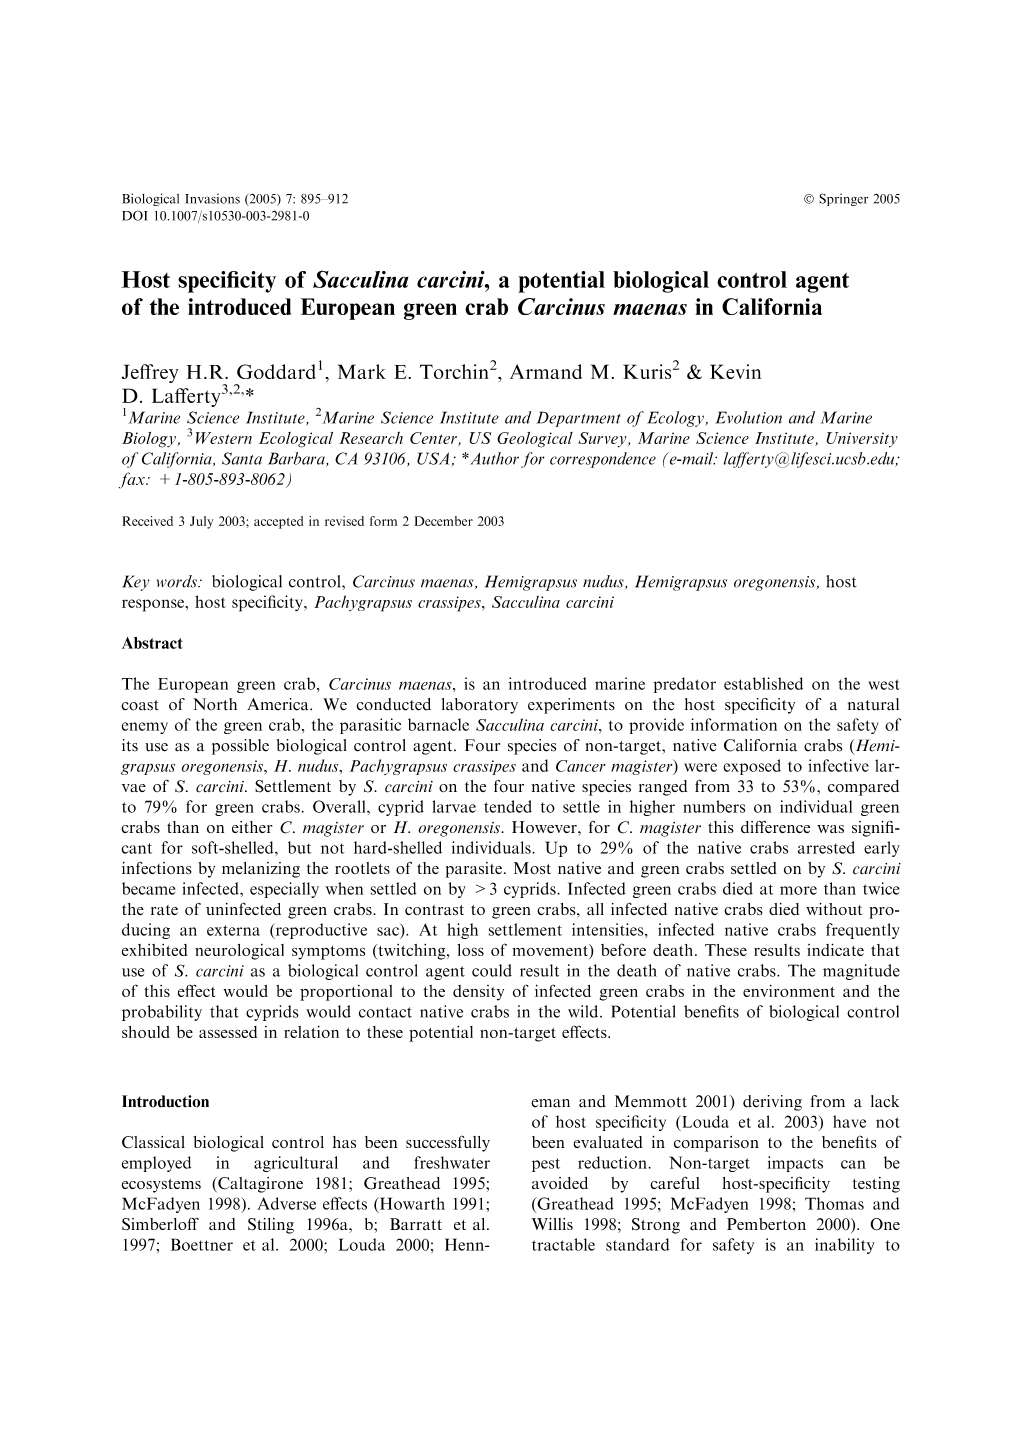 Host Specificity of Sacculina Carcini, a Potential Biological Control Agent of the Introduced European Green Crab Carcinus Maena